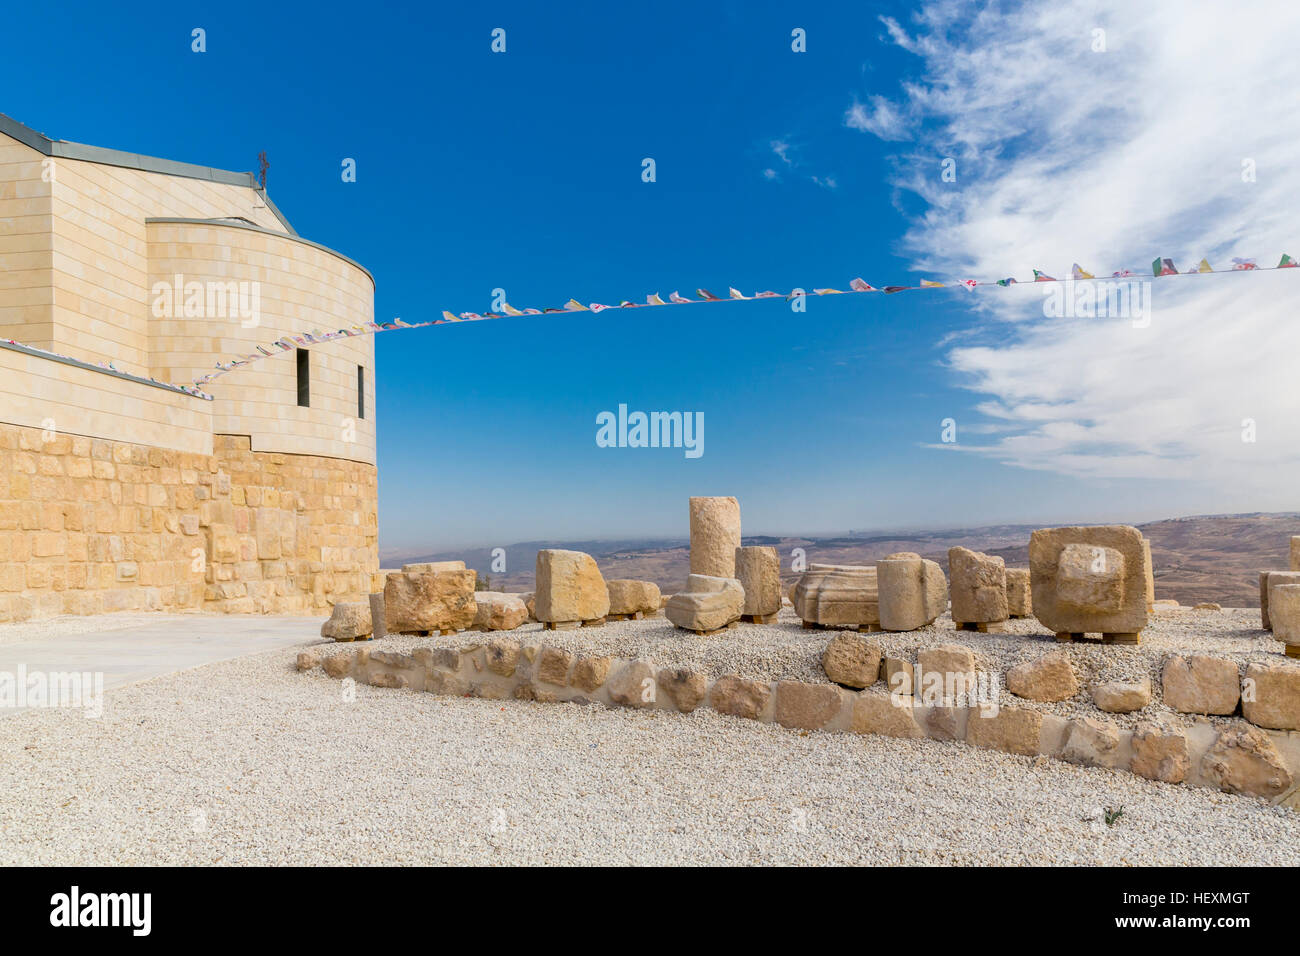 Jordan, Madaba, Province, view to New Church and stones of the old Memorial Church Stock Photo